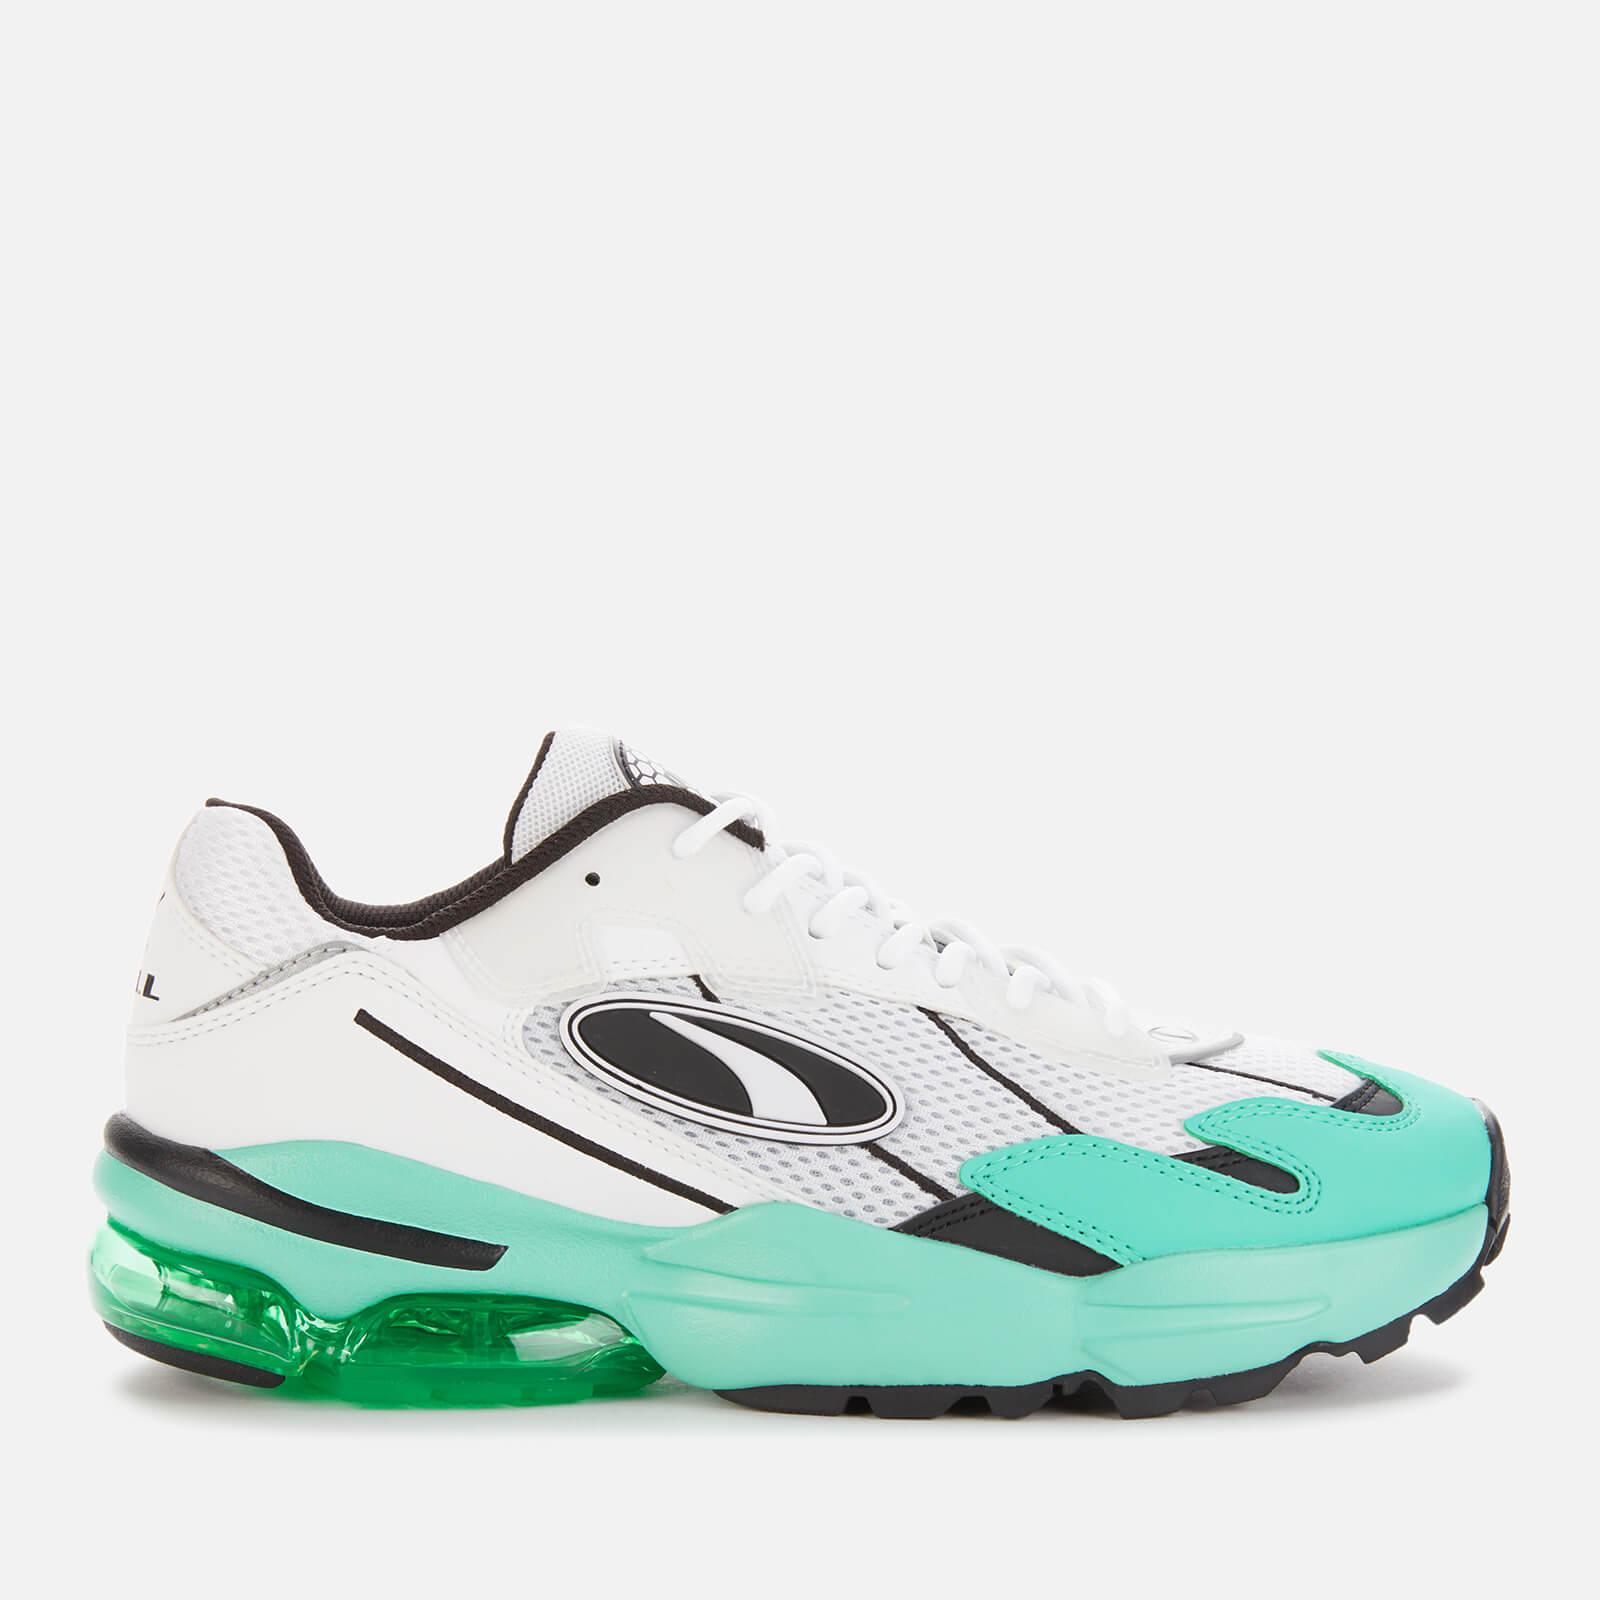 PUMA Cell Ultra Medical Trainers in 